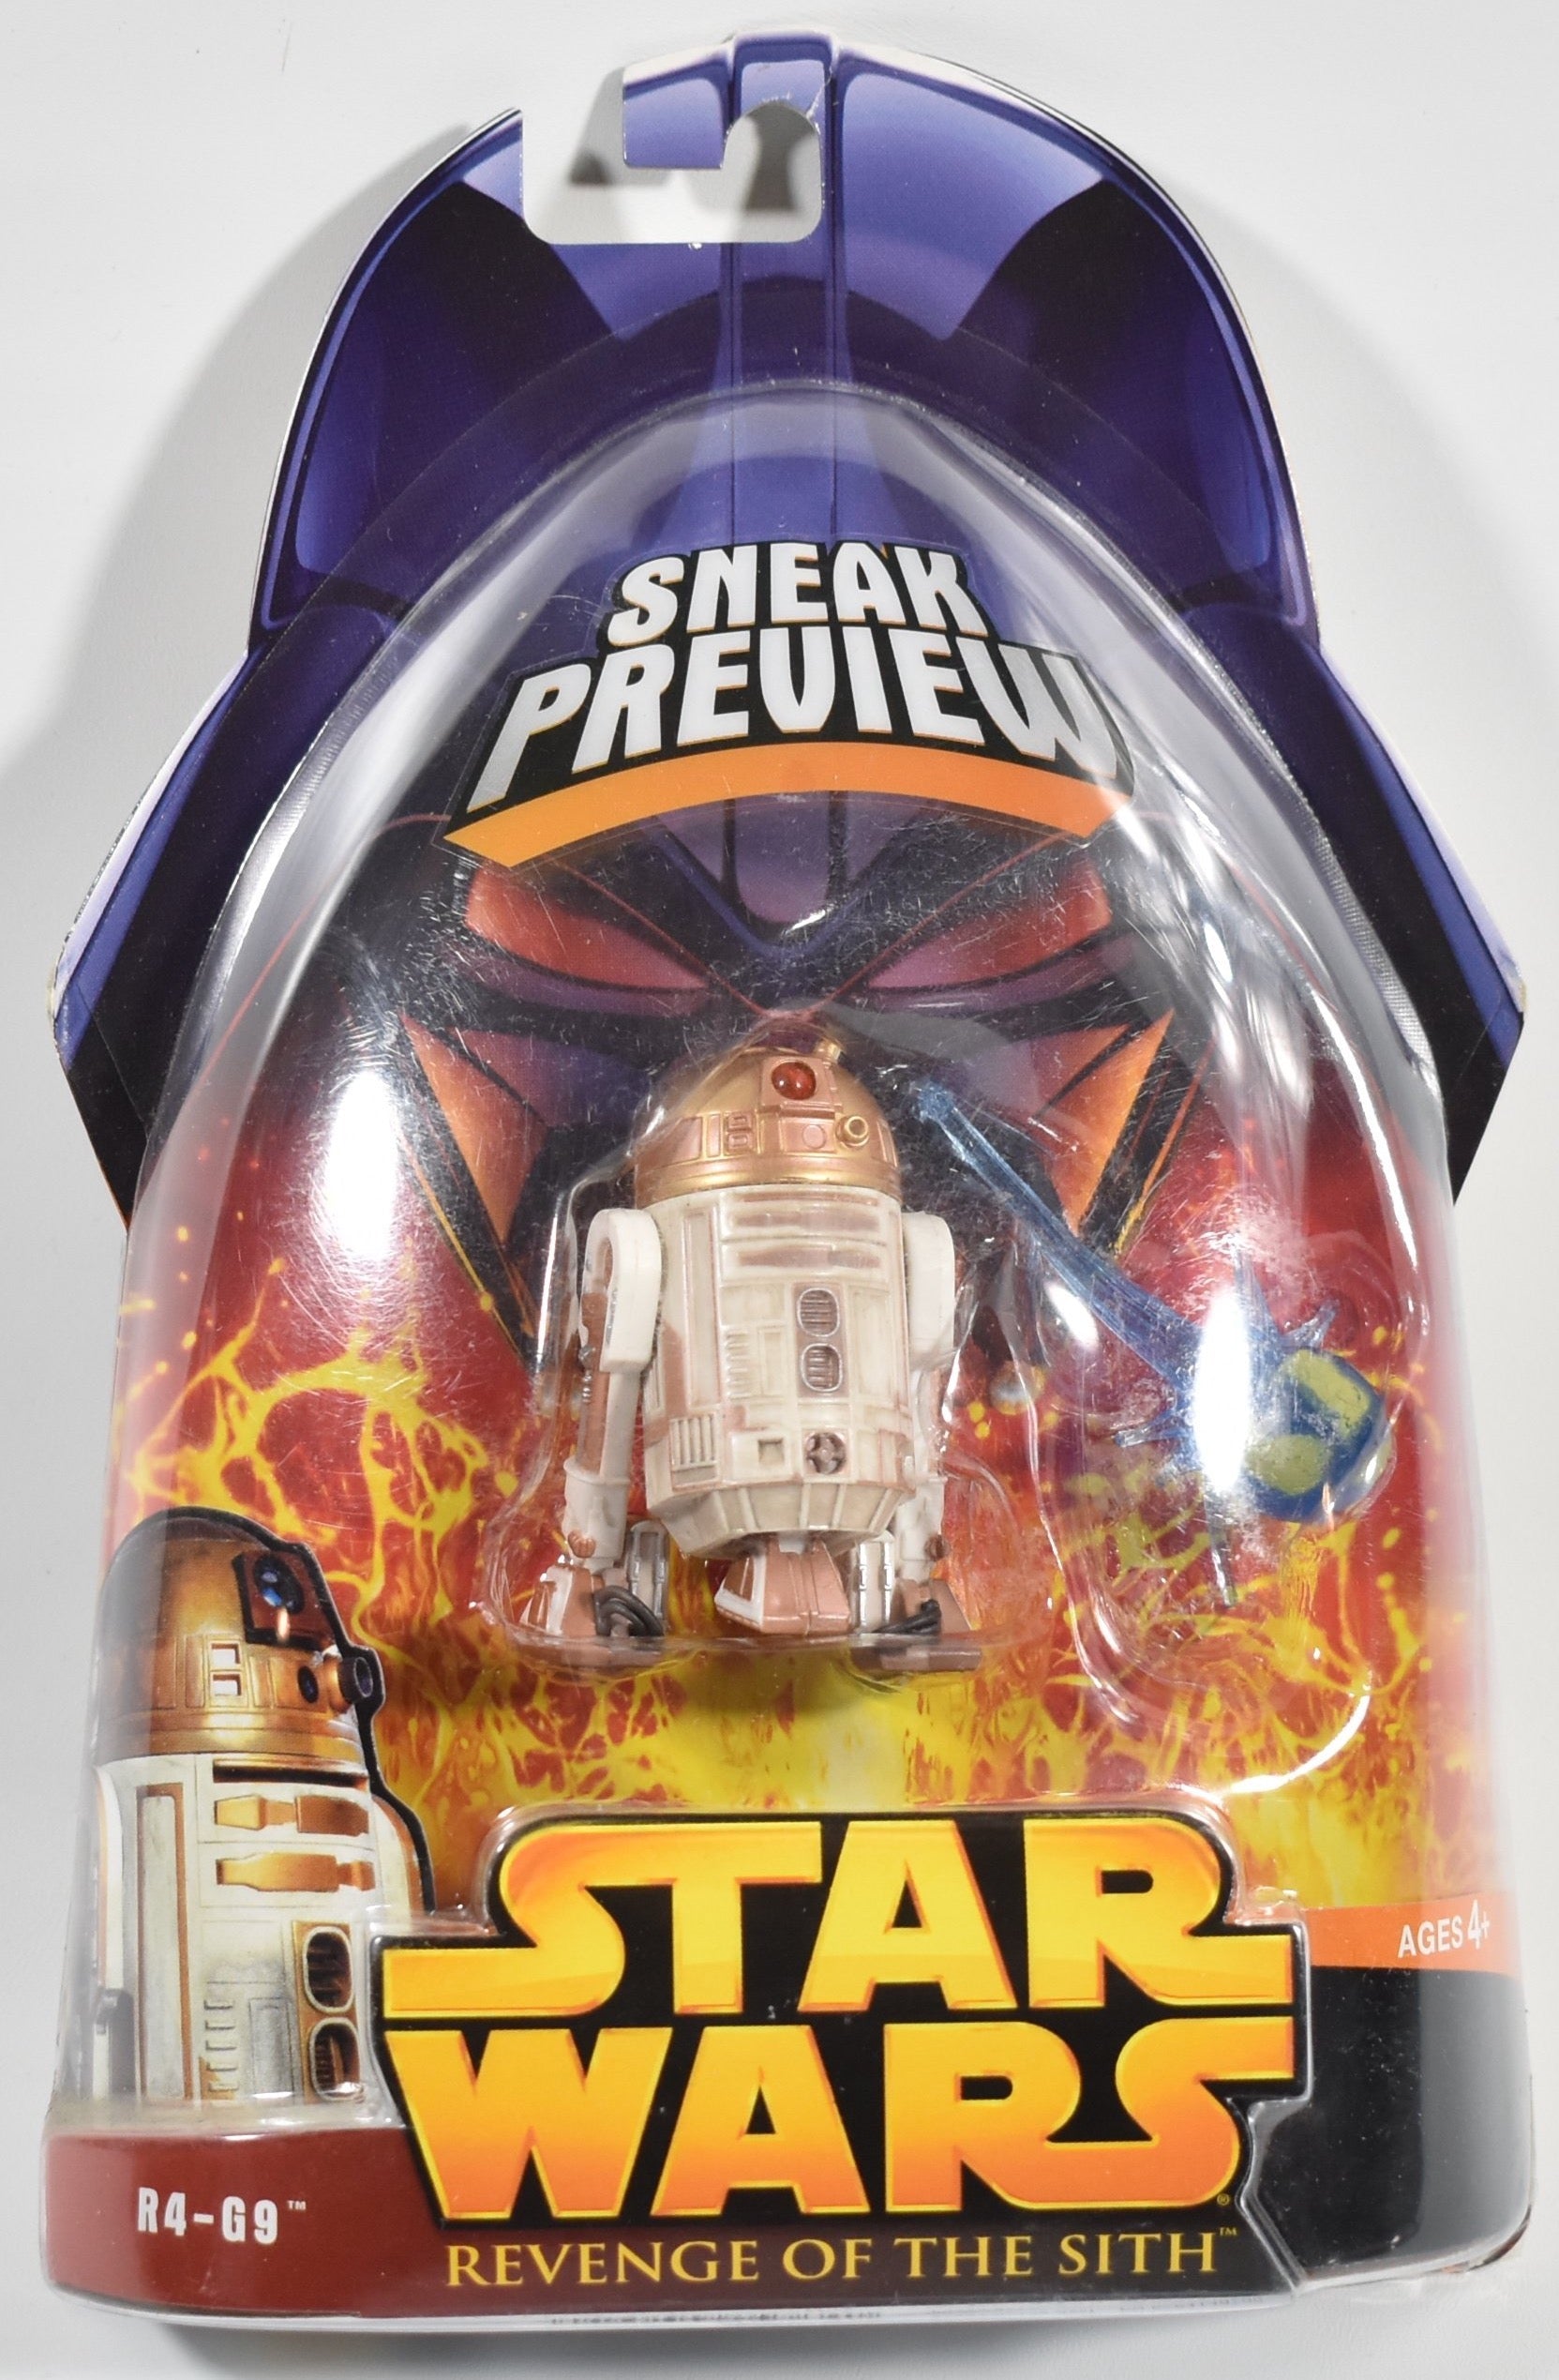 Revenge of the Sith Sneak Preview Action Figure R4-G9